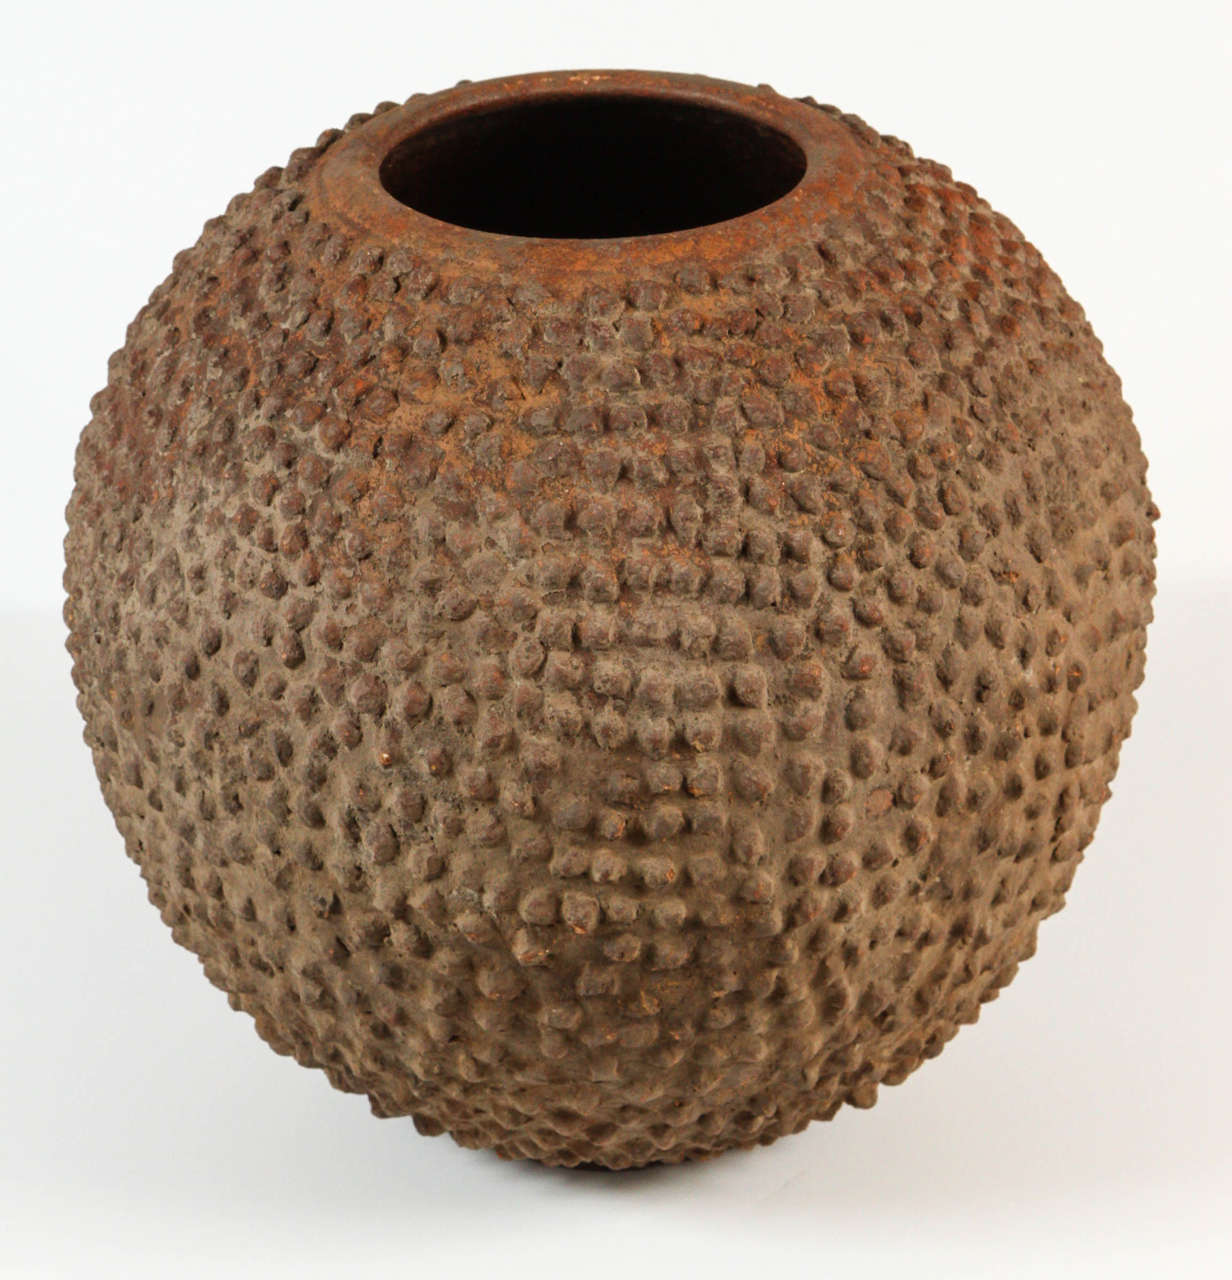 Volcanic clay Lobi pot with an arrangement of rounded points. This pot in excellent condition was executed about late 1970s-1990.

The Lobi are an ethnic group that originated in what is today Ghana. Starting around 1770 many of the Lobi migrated